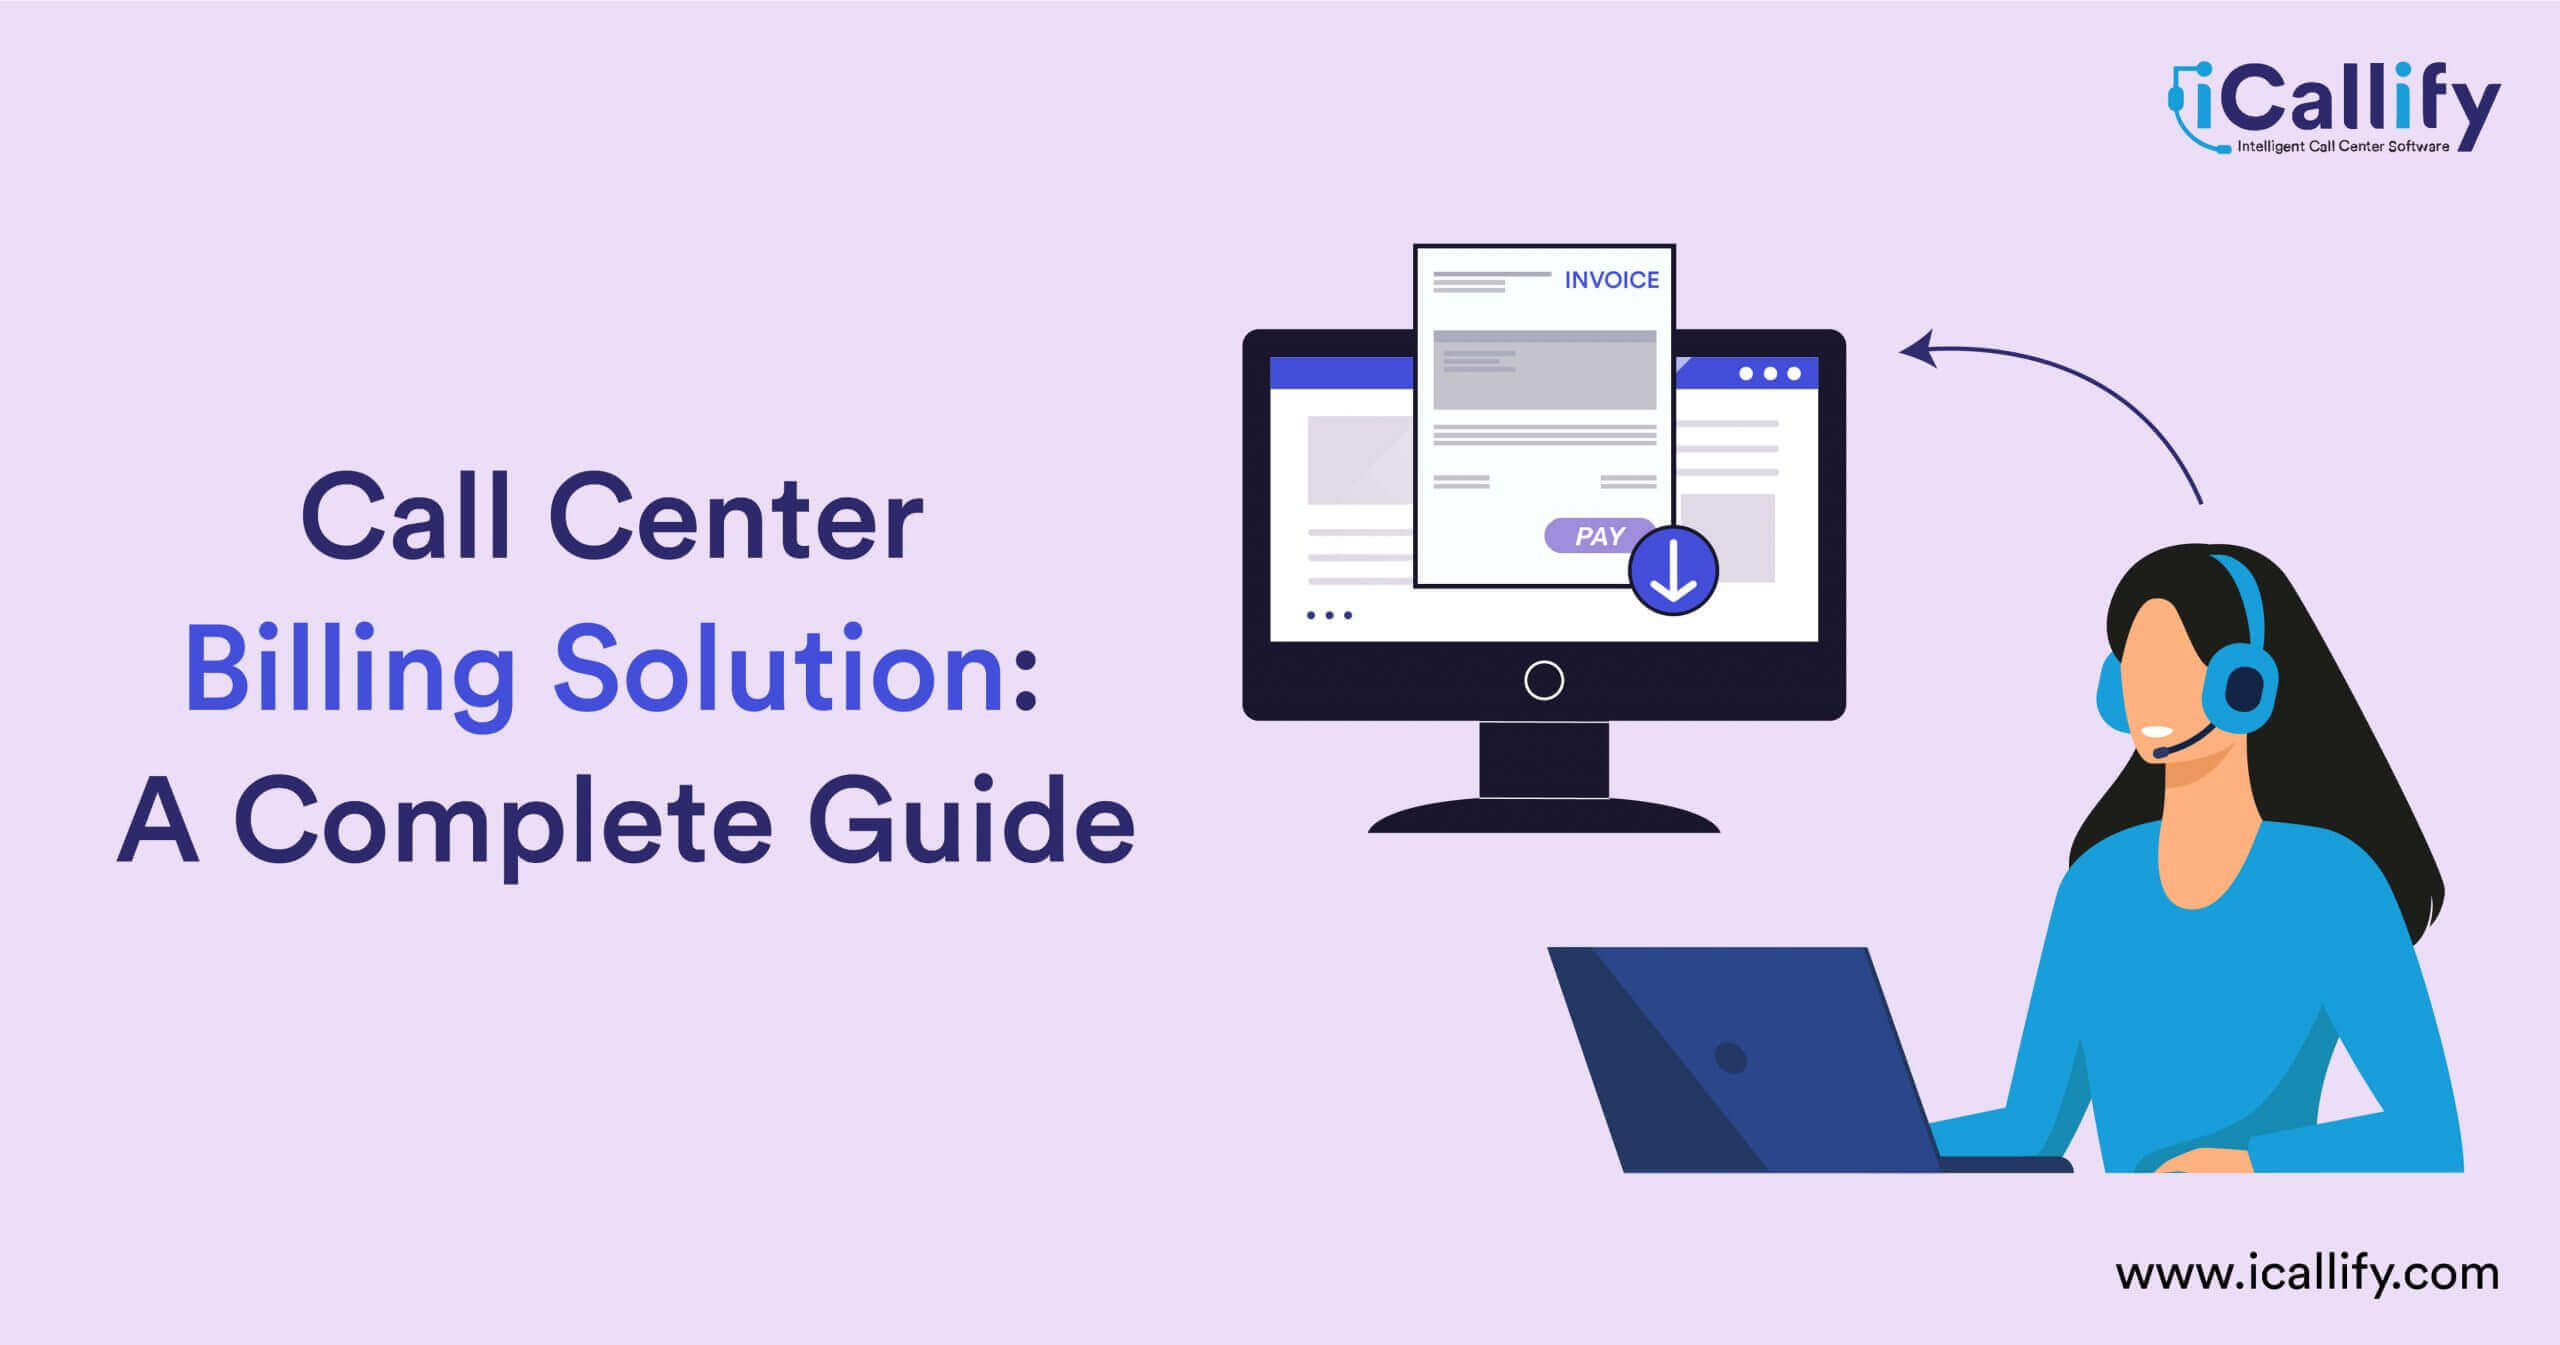 Call Center Billing Solution: A Complete Guide